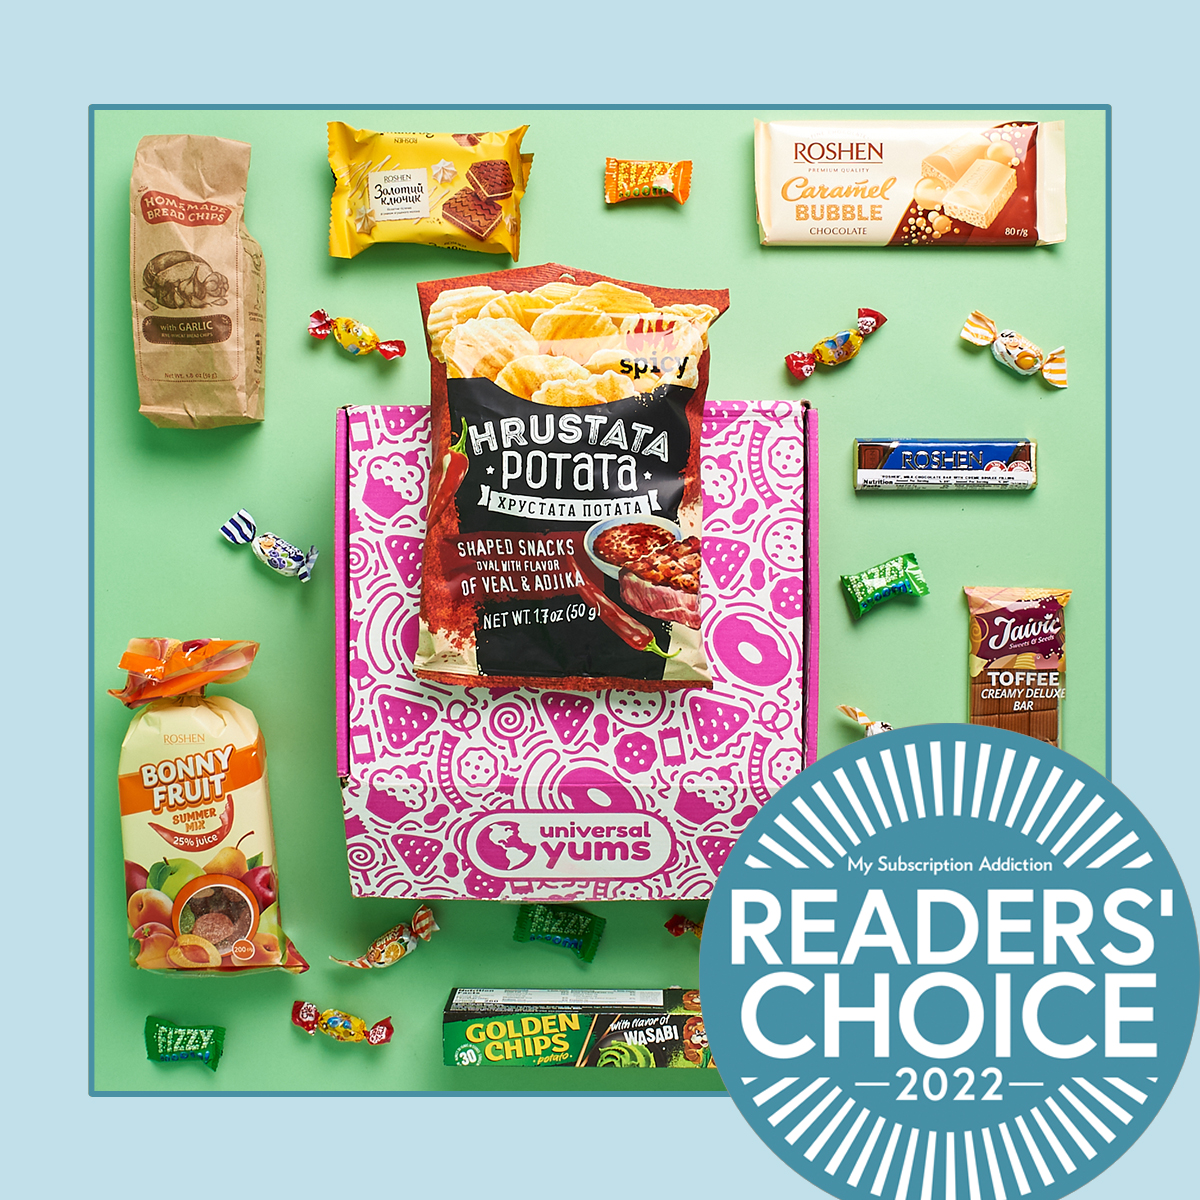 16 Best Snack Subscription Boxes in 2022 | MSA